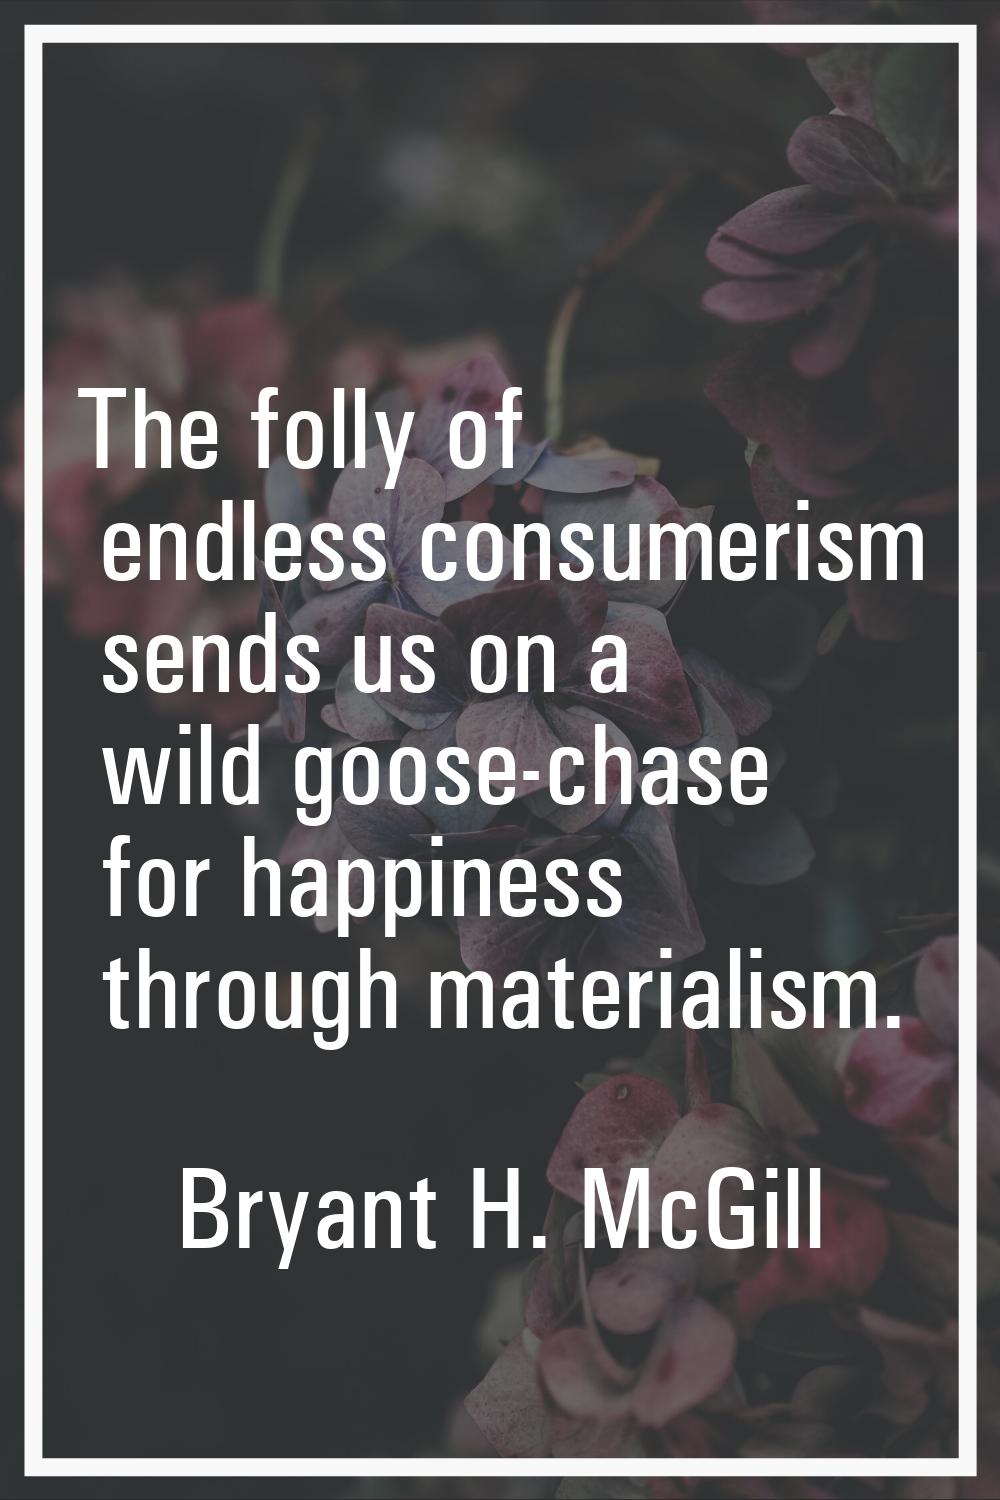 The folly of endless consumerism sends us on a wild goose-chase for happiness through materialism.